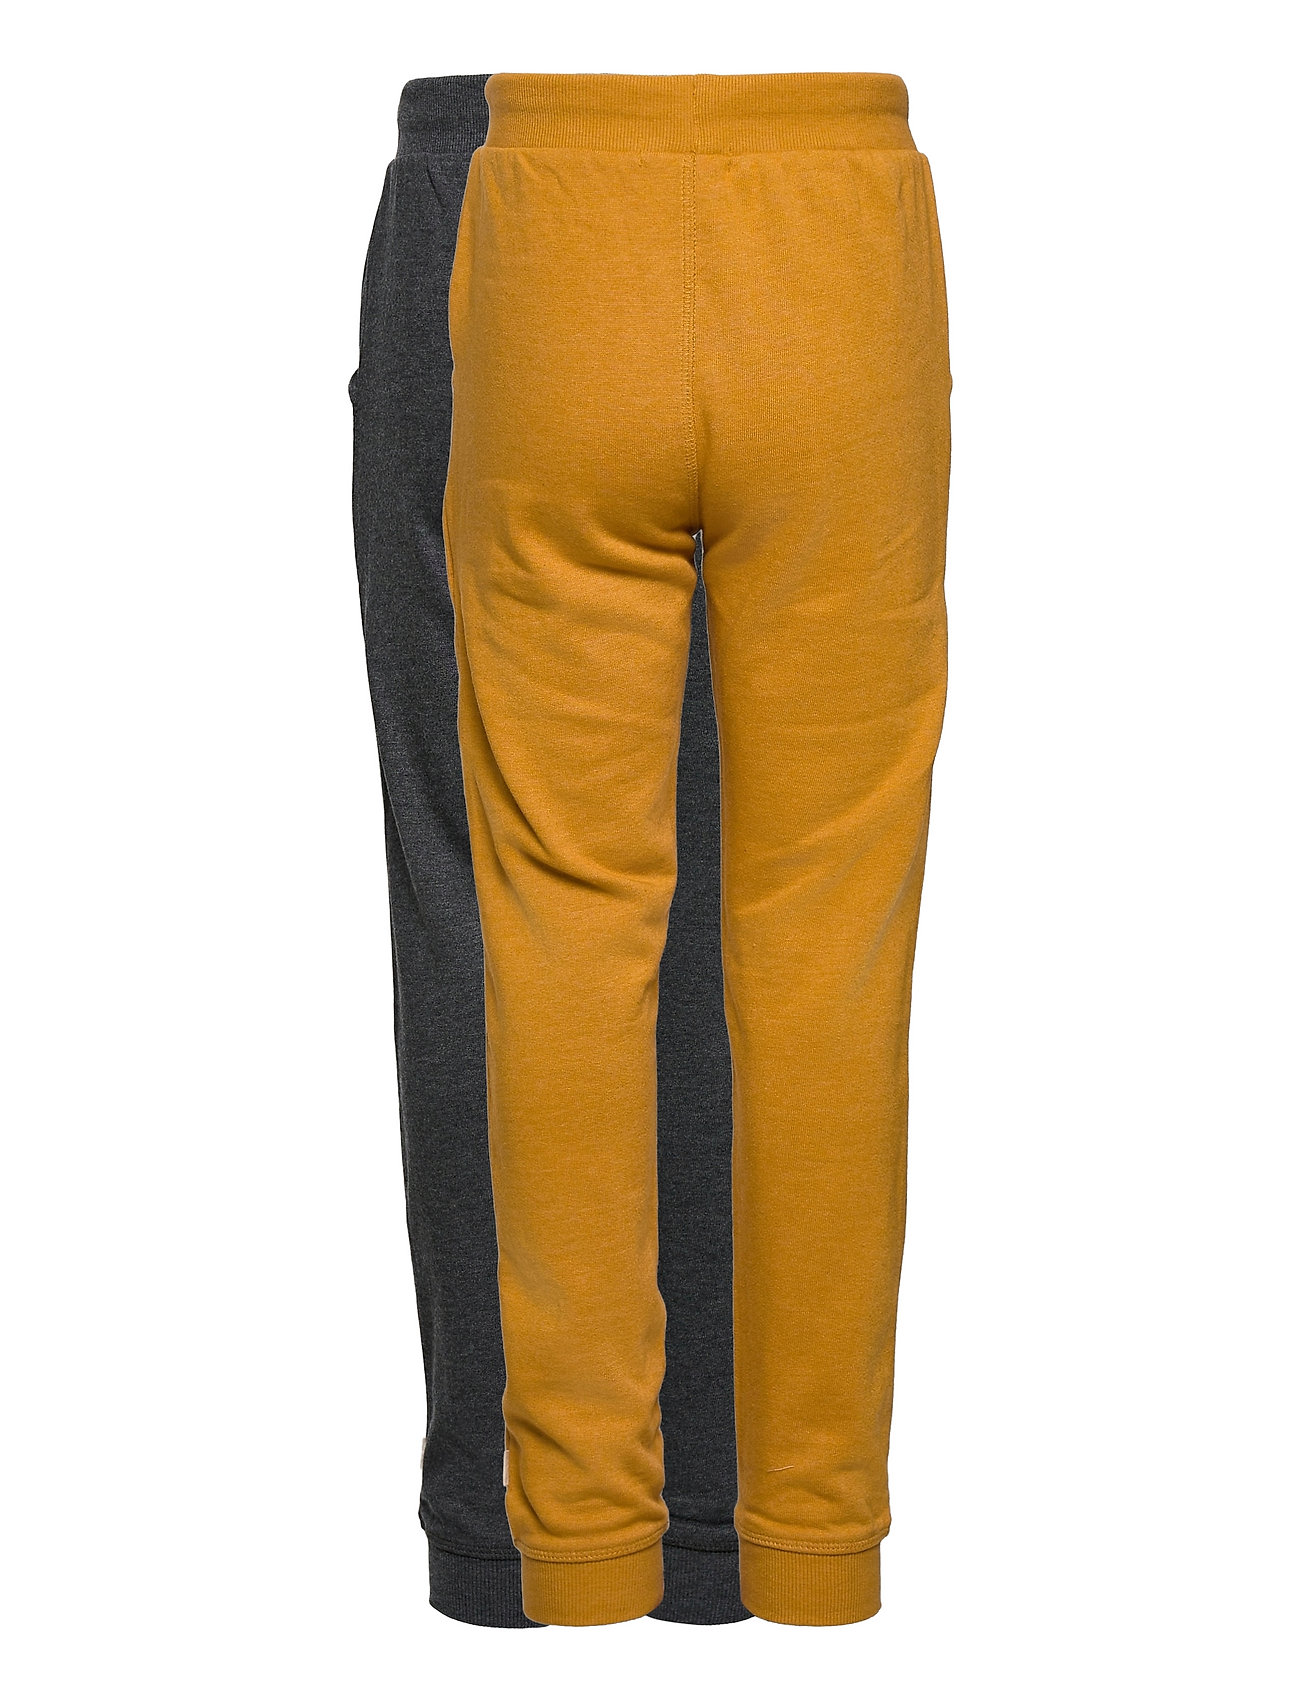 Minymo - Basic 36 -Sweat pant (2-pack) - lowest prices - narcissus - 1